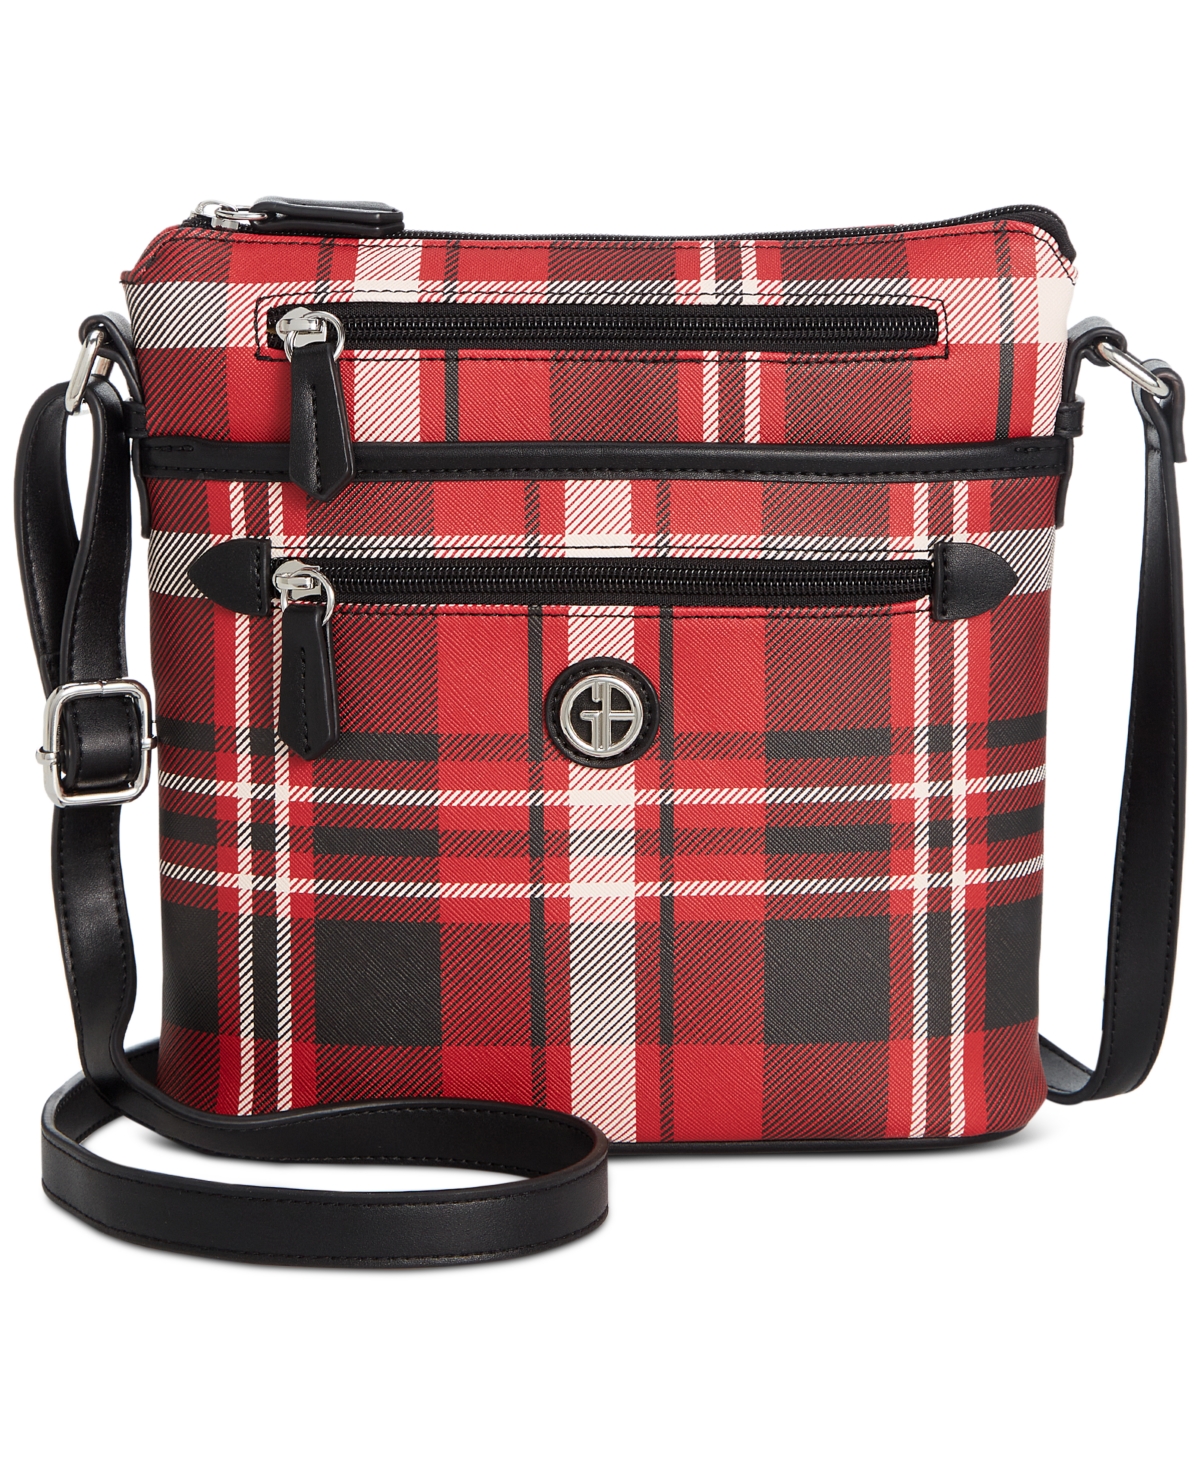 Plaid North South Crossbody, Created for Macy's - Red Plaid